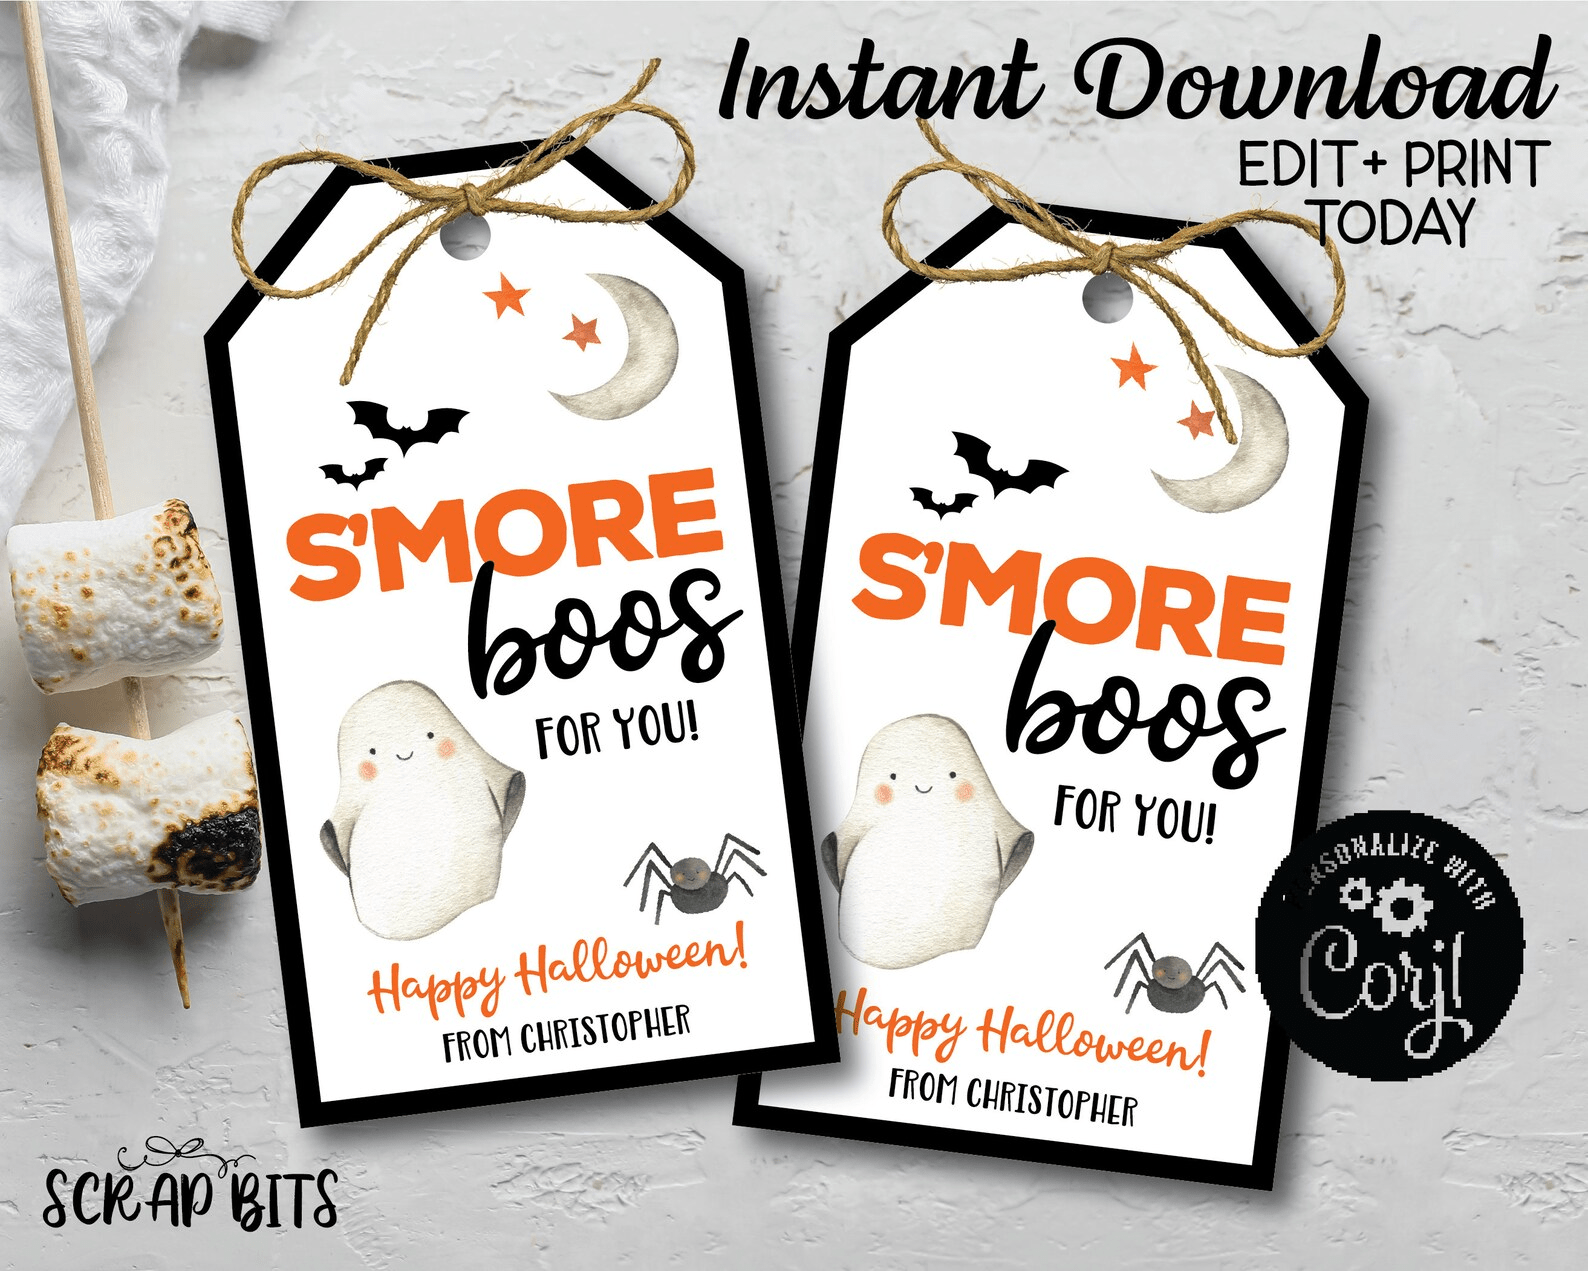 S'more Boos Tags, Printable Halloween Tags, Editable Smores Tags . Instant Download Editable Template - Scrap Bits